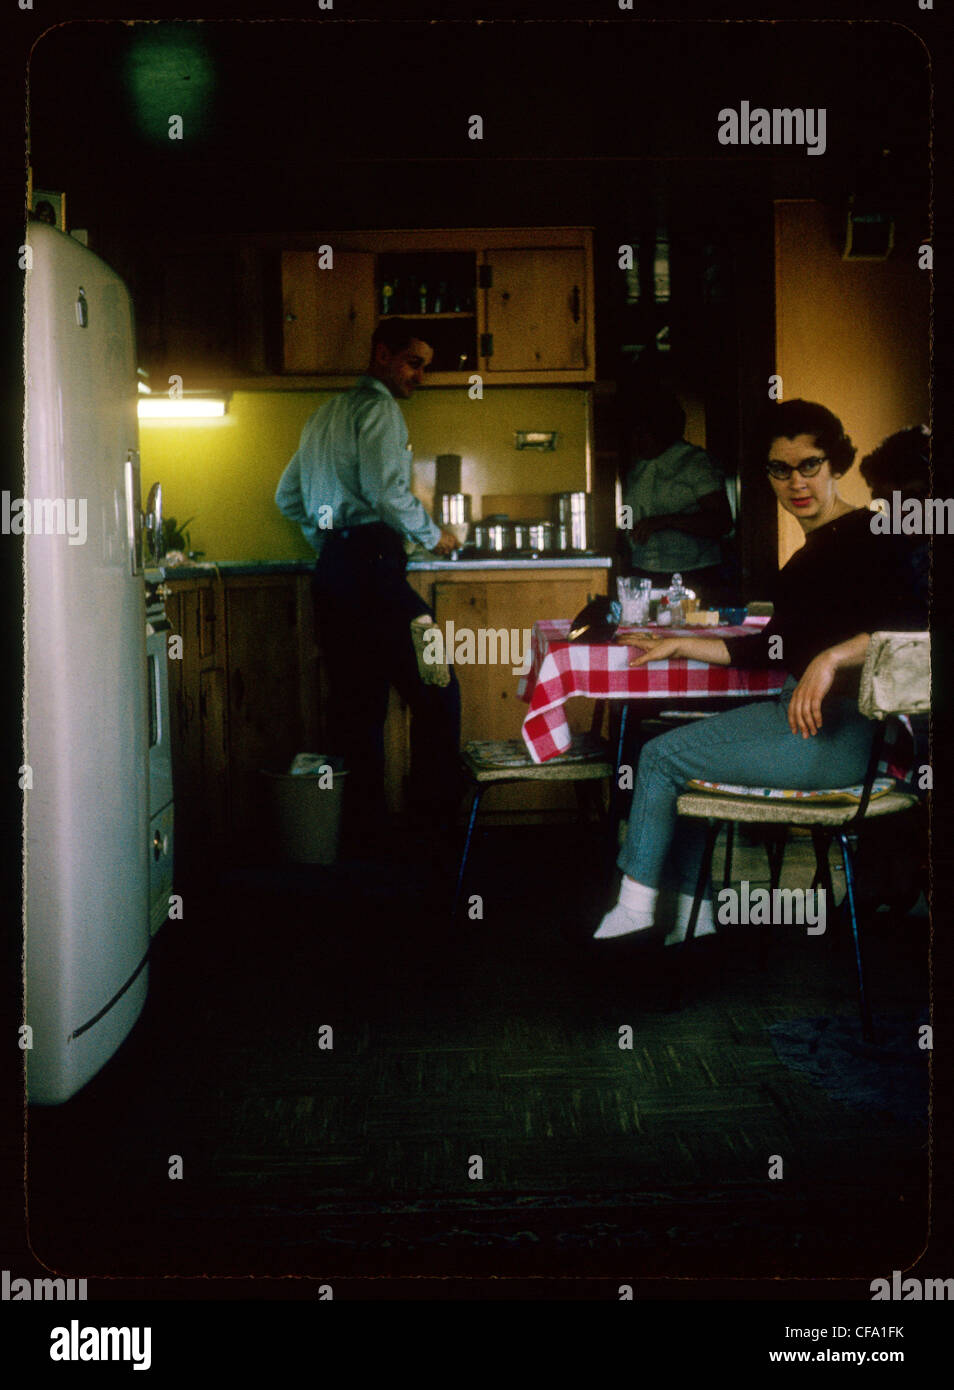 woman sitting man standing in kitchen during the 1960s Stock Photo